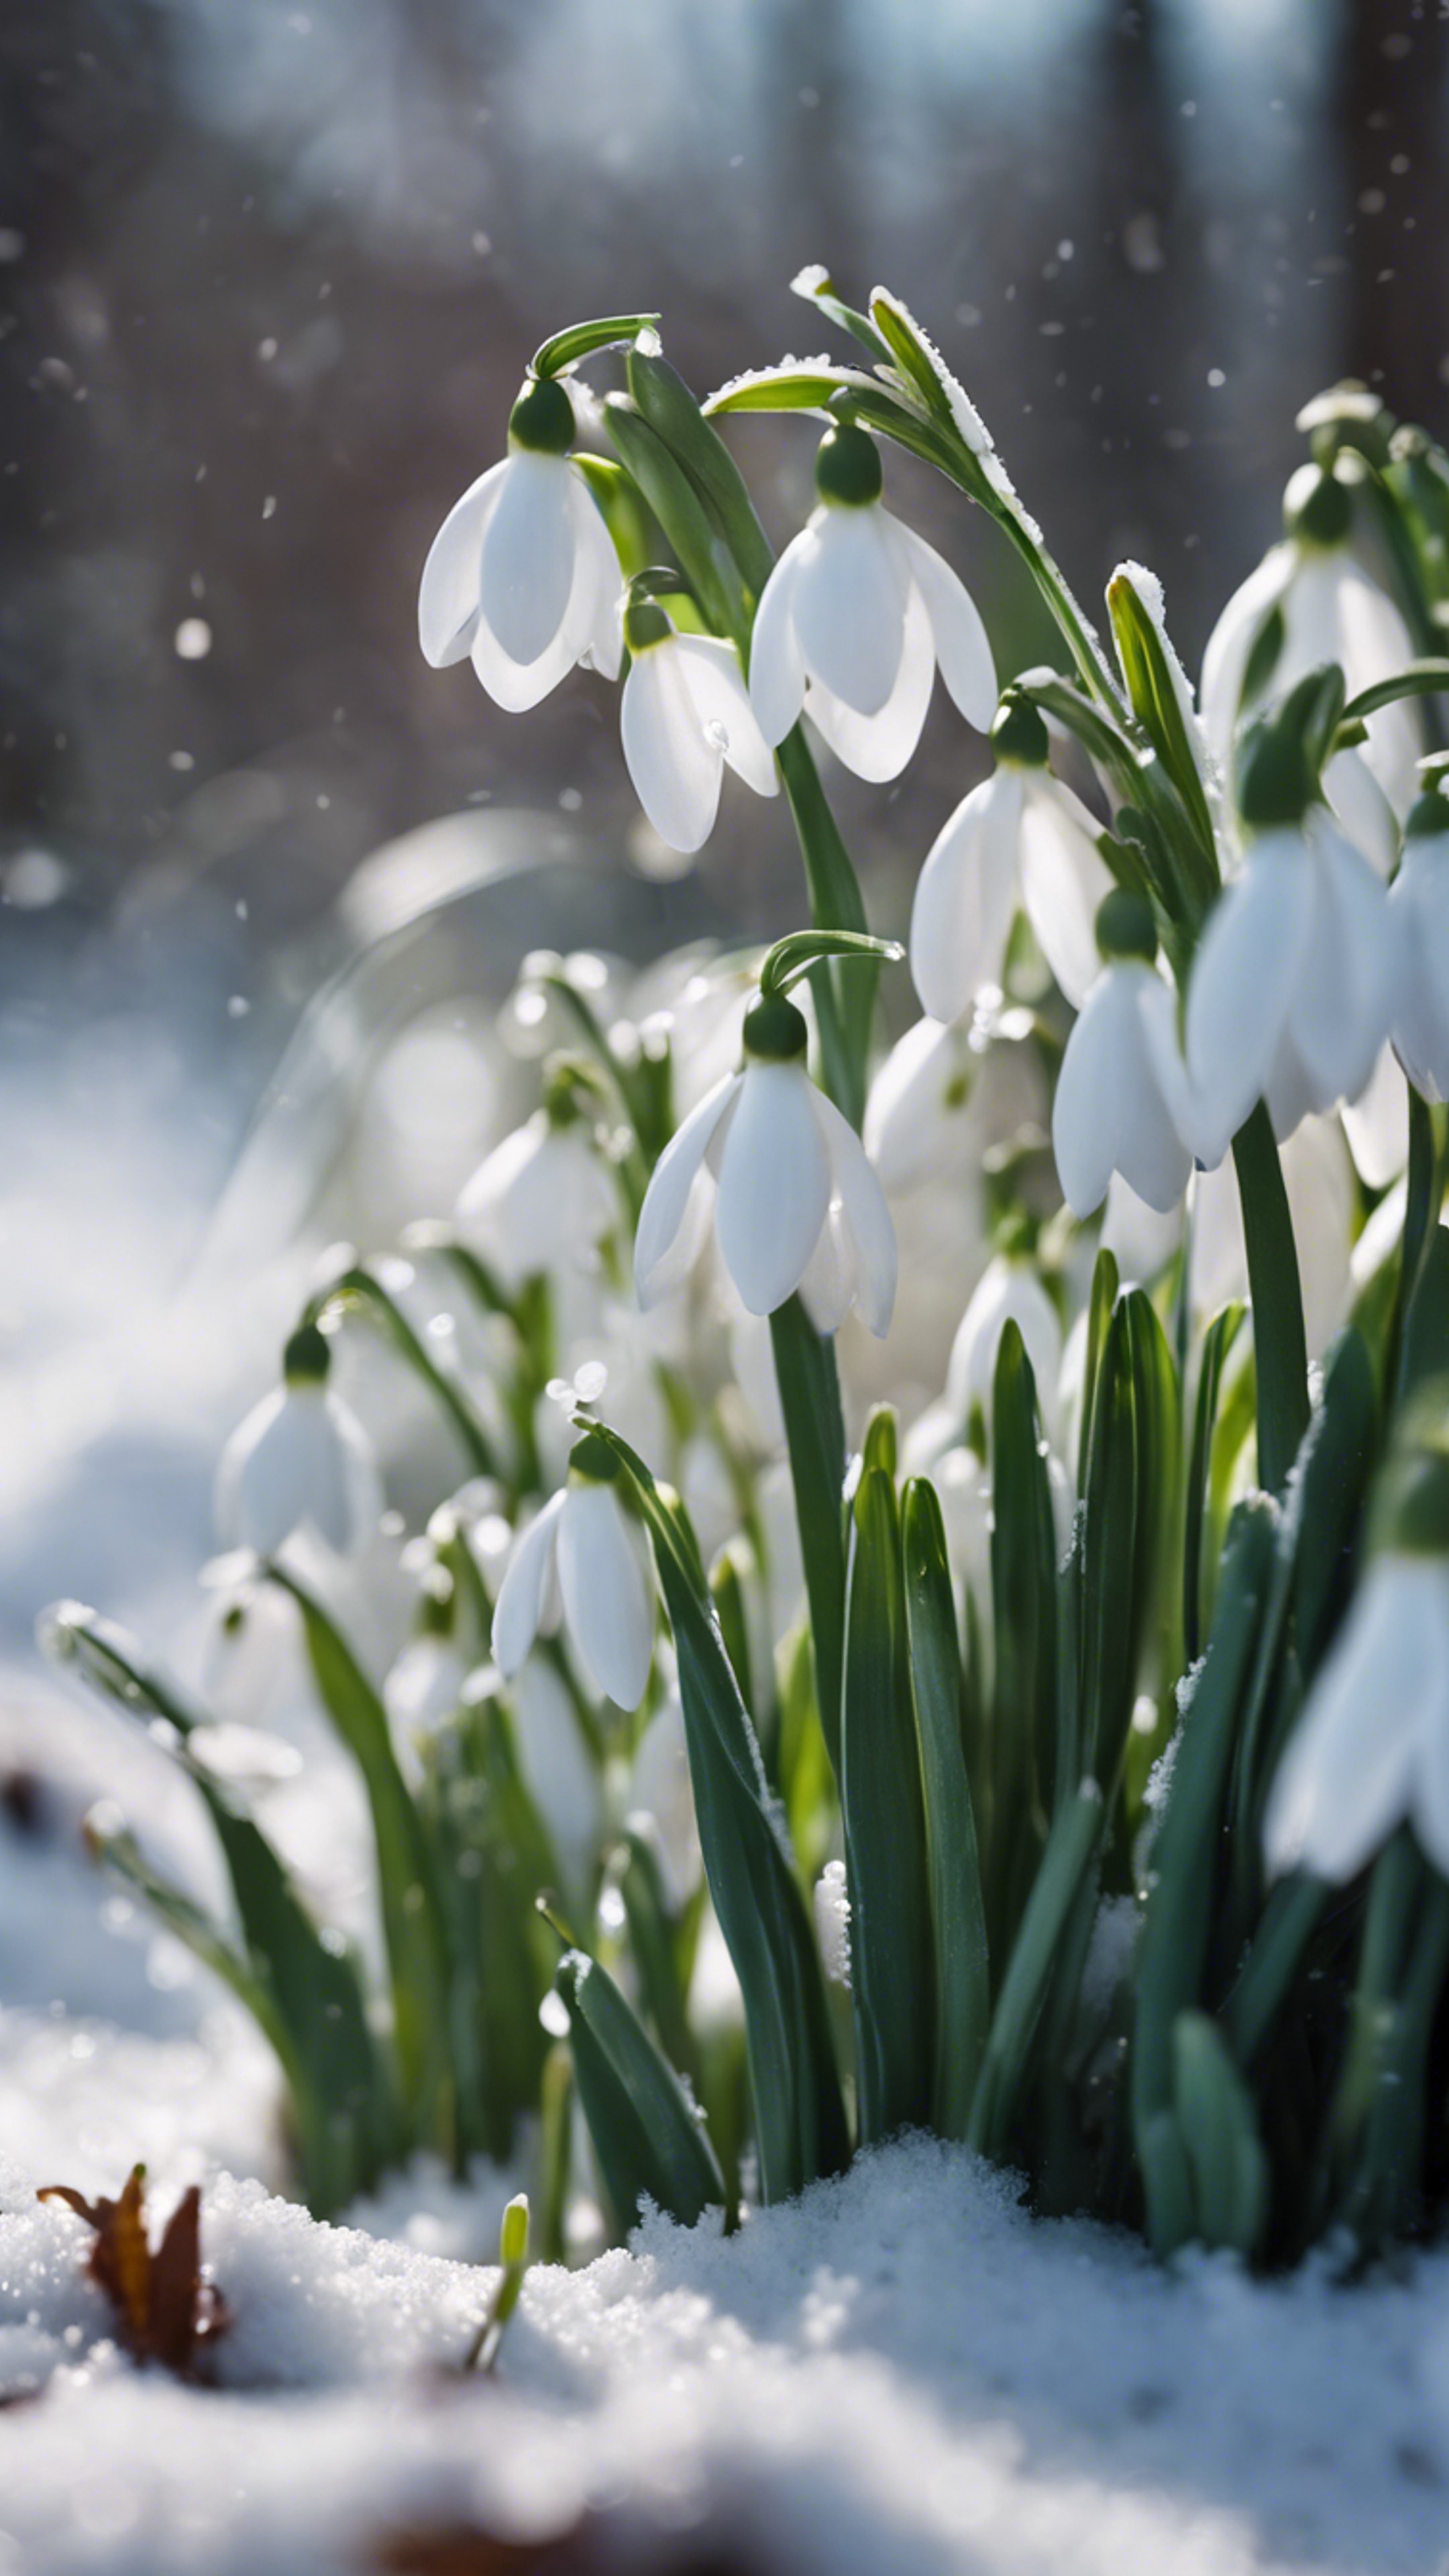 A patch of white snowdrops peeking through a dusting of late spring snow. Fond d'écran[e64c535efd0a459c9840]